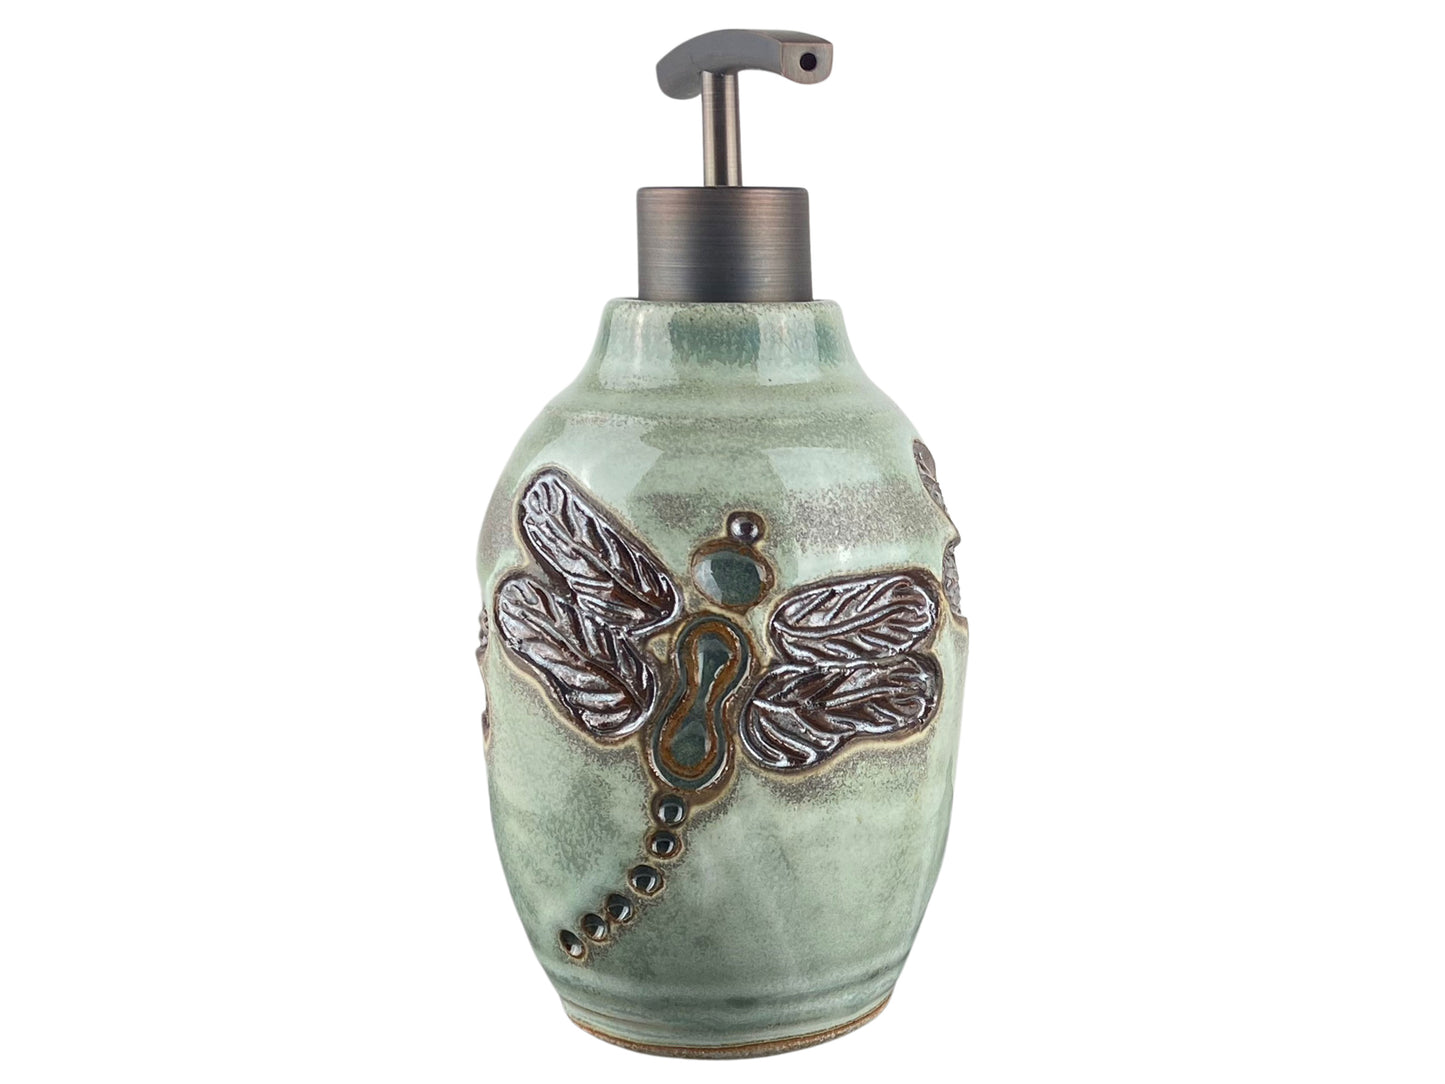 15 oz. Liquid Soap or Lotion Dispenser with Dragonfly Design